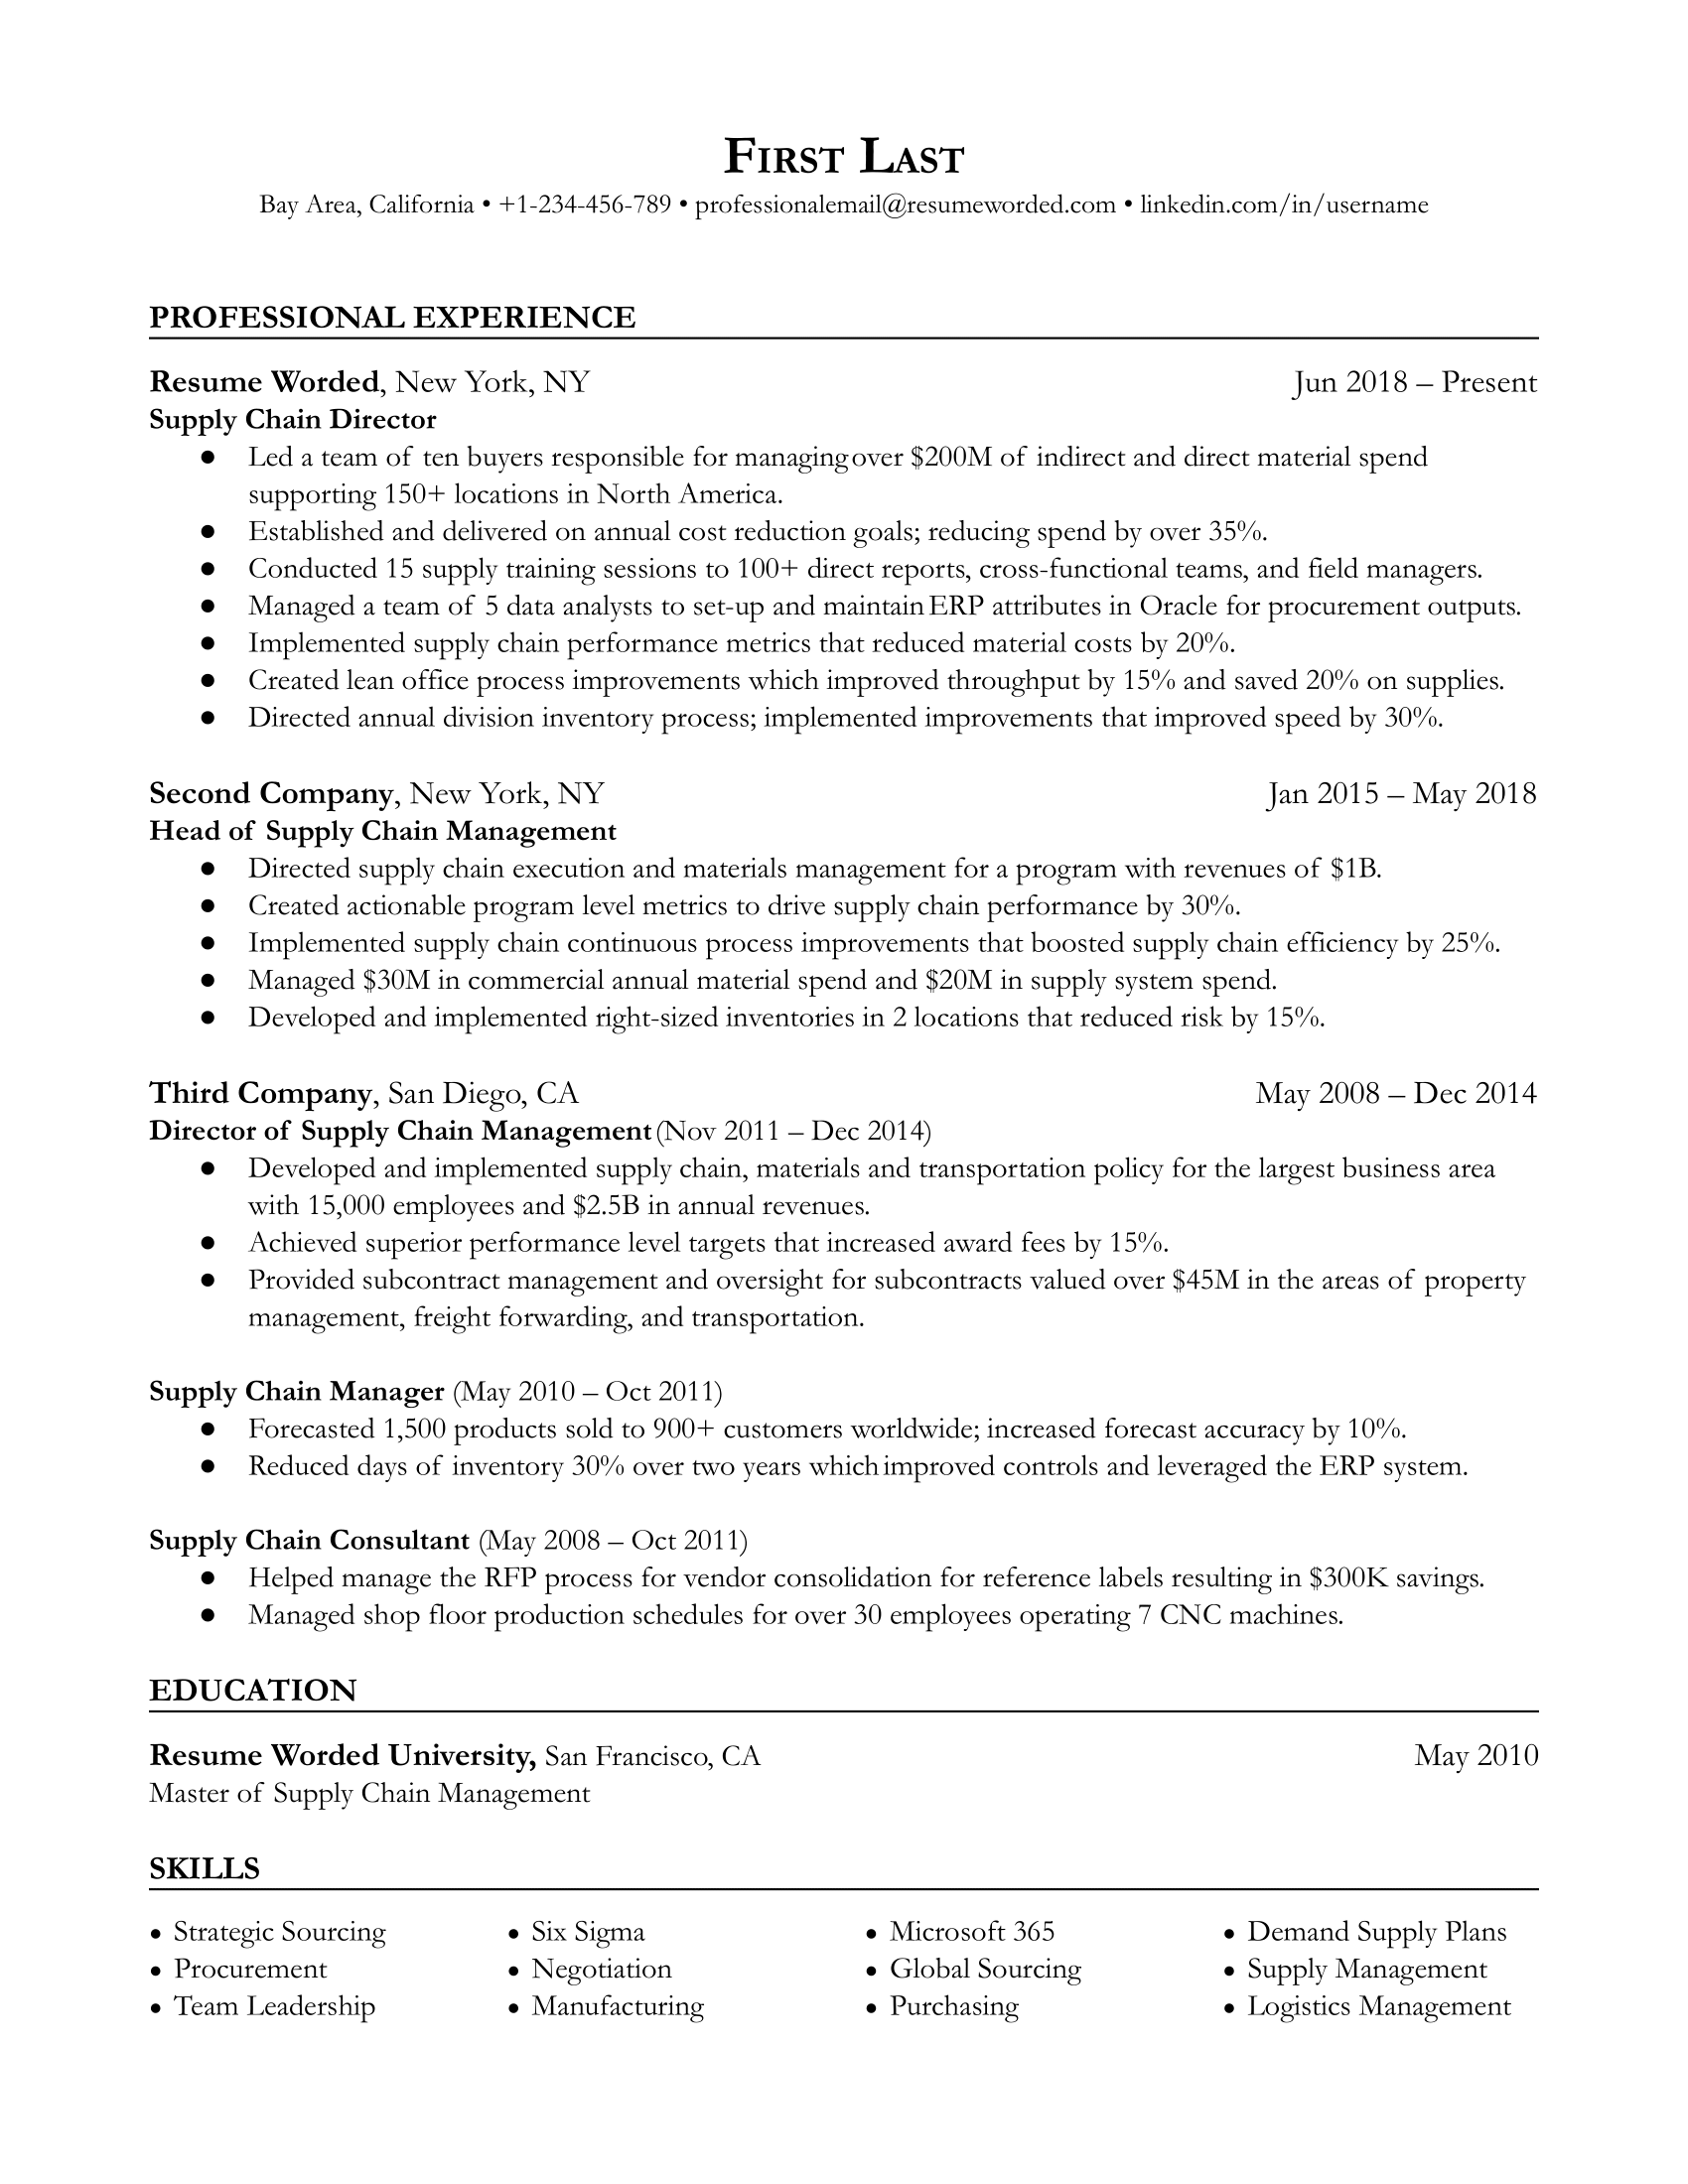 Supply Chain Director resume example